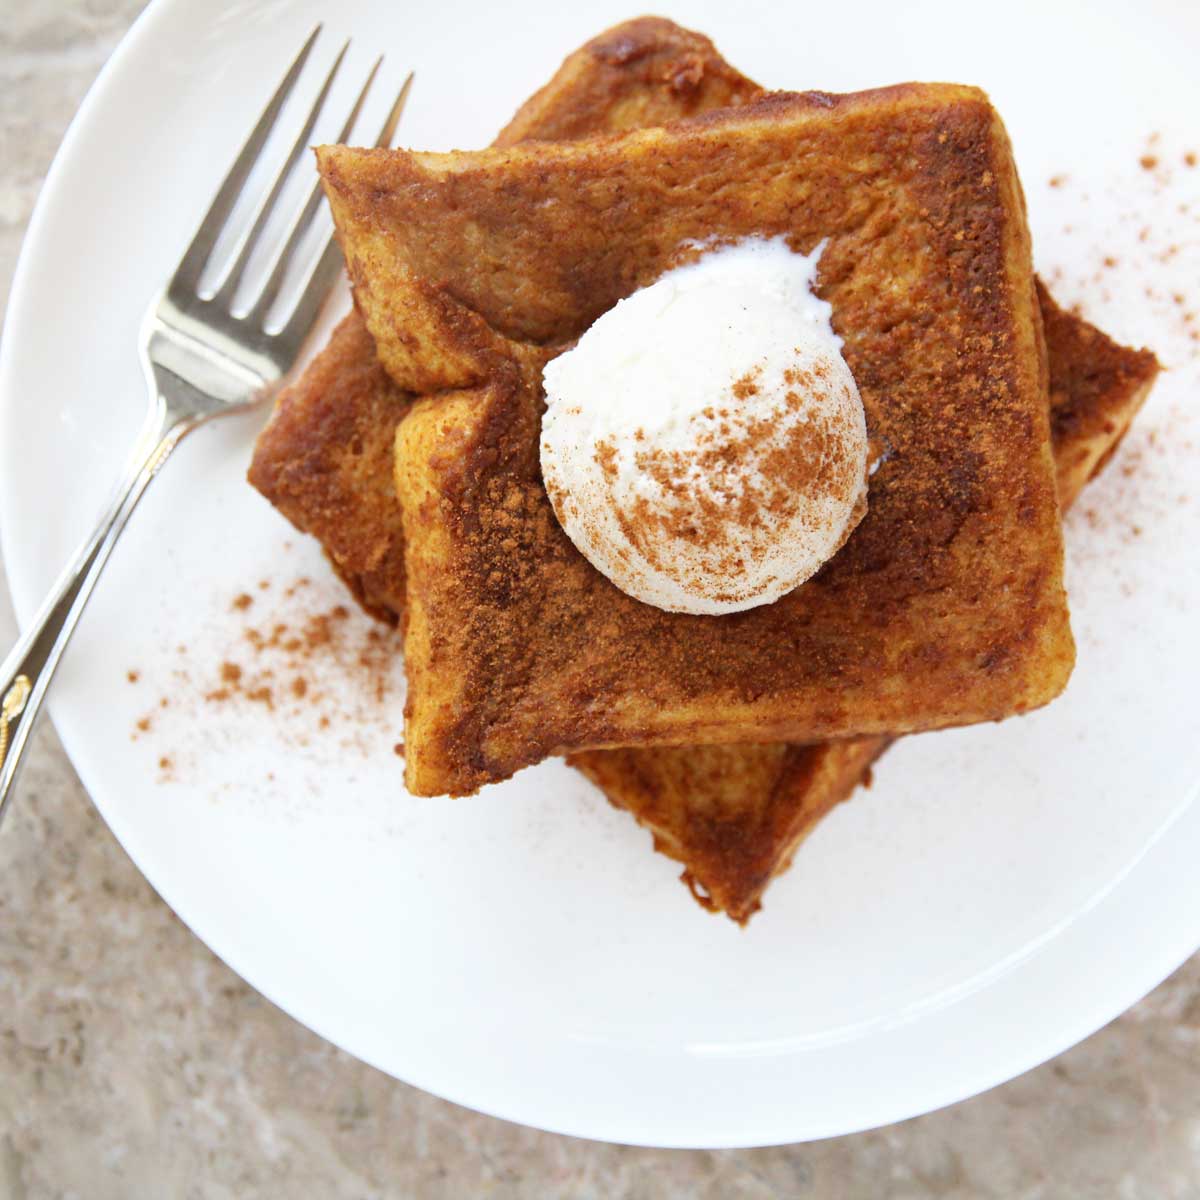 Easy vegan pumpkin spice French toast at home served with ice cream